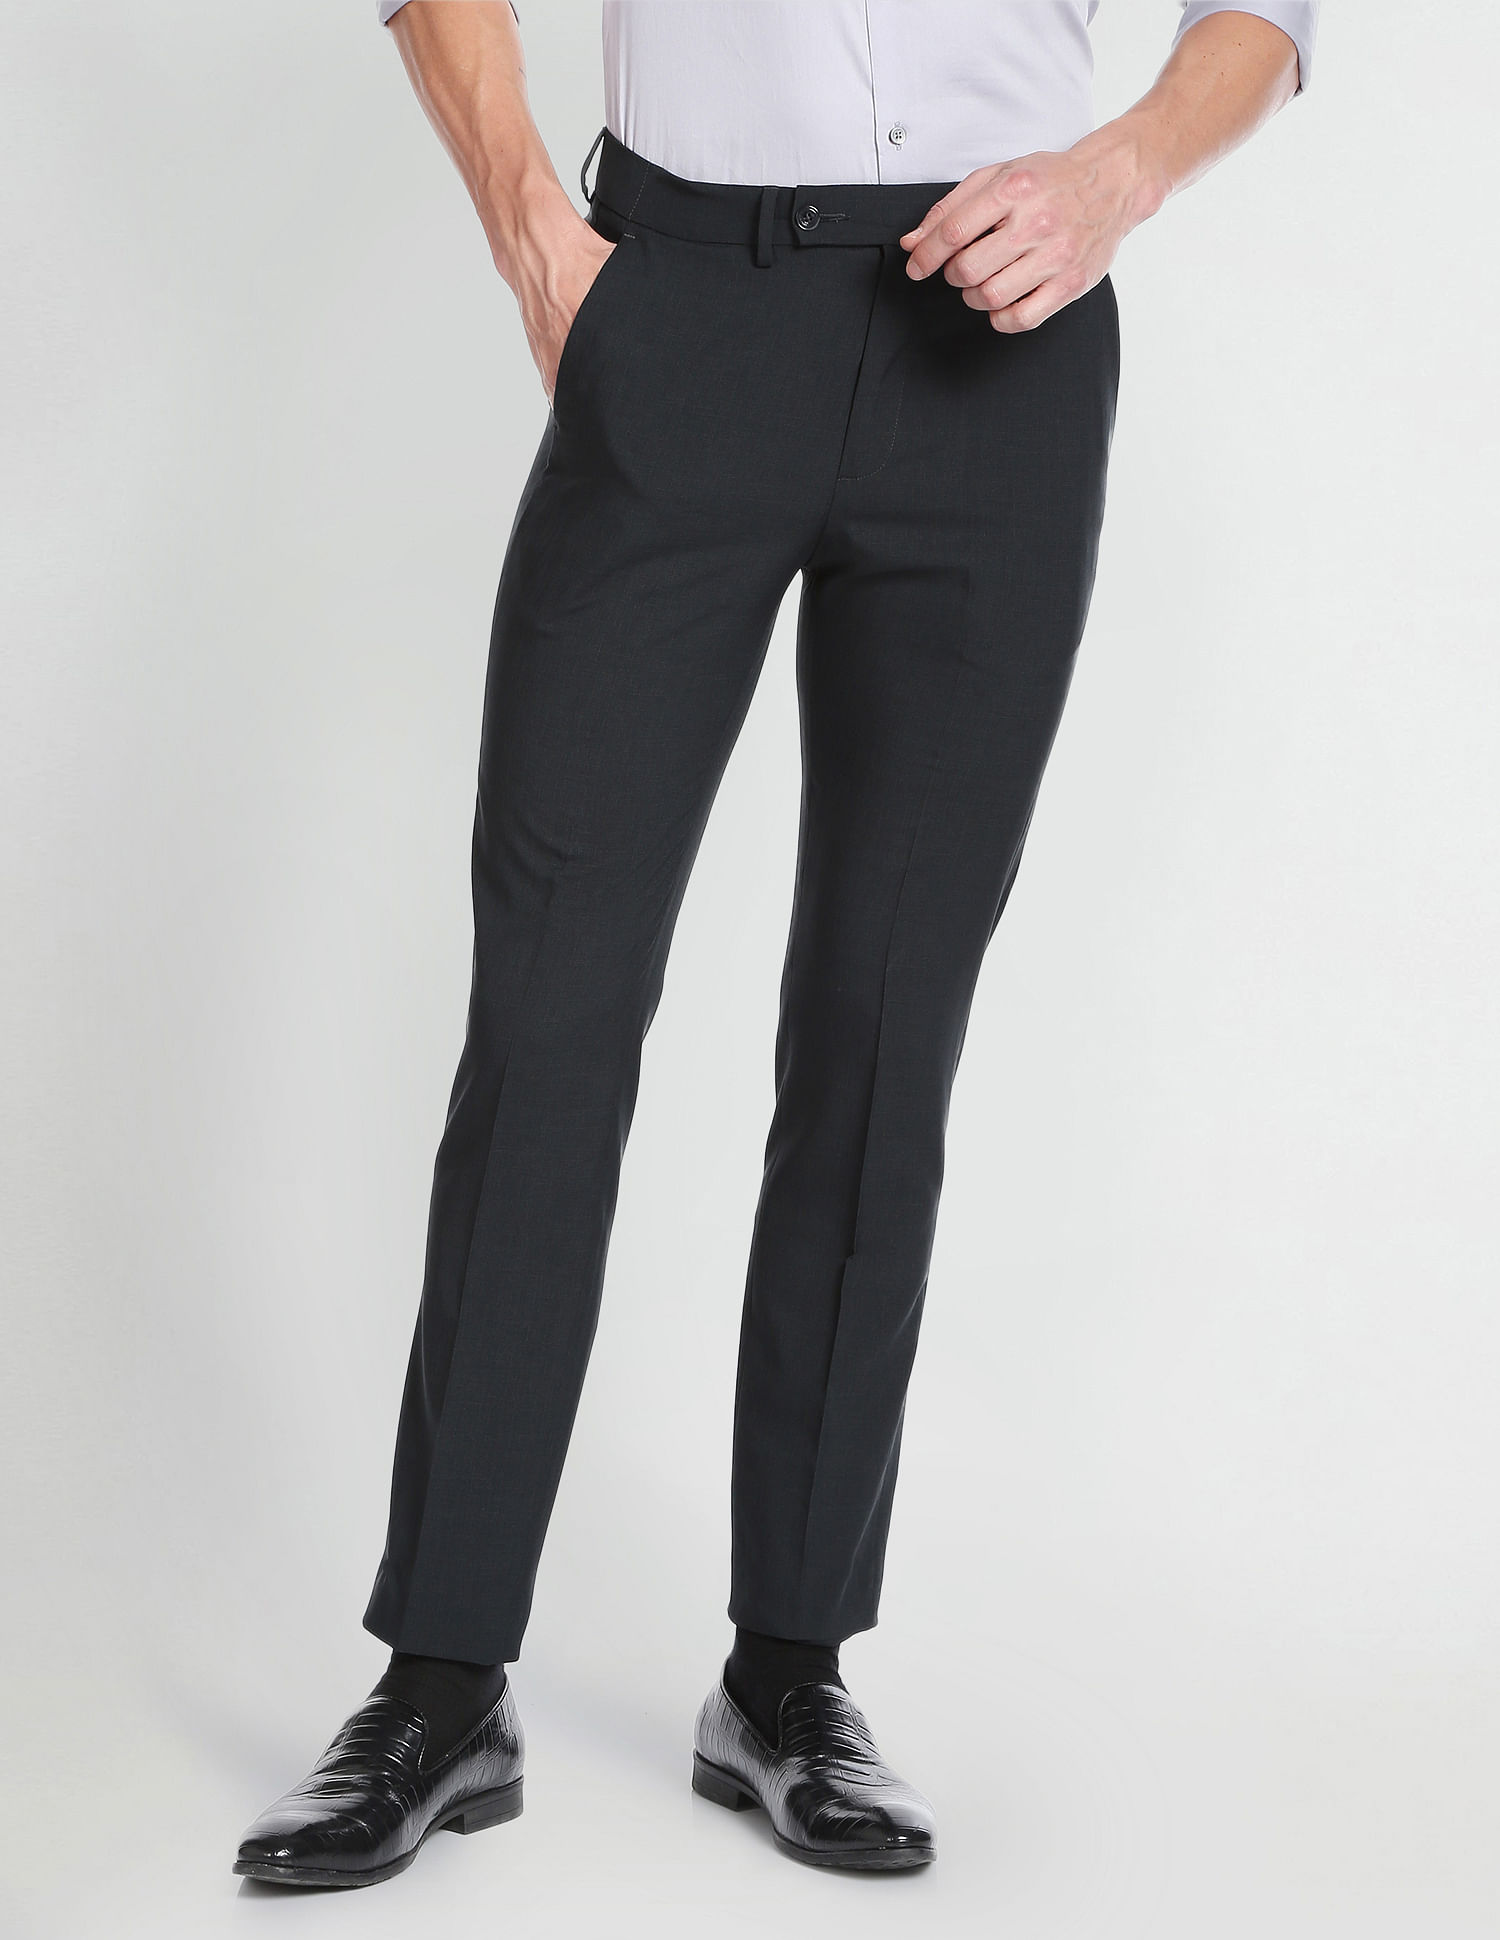 Buy Arrow Newyork Micro Check Polyester Formal Trousers